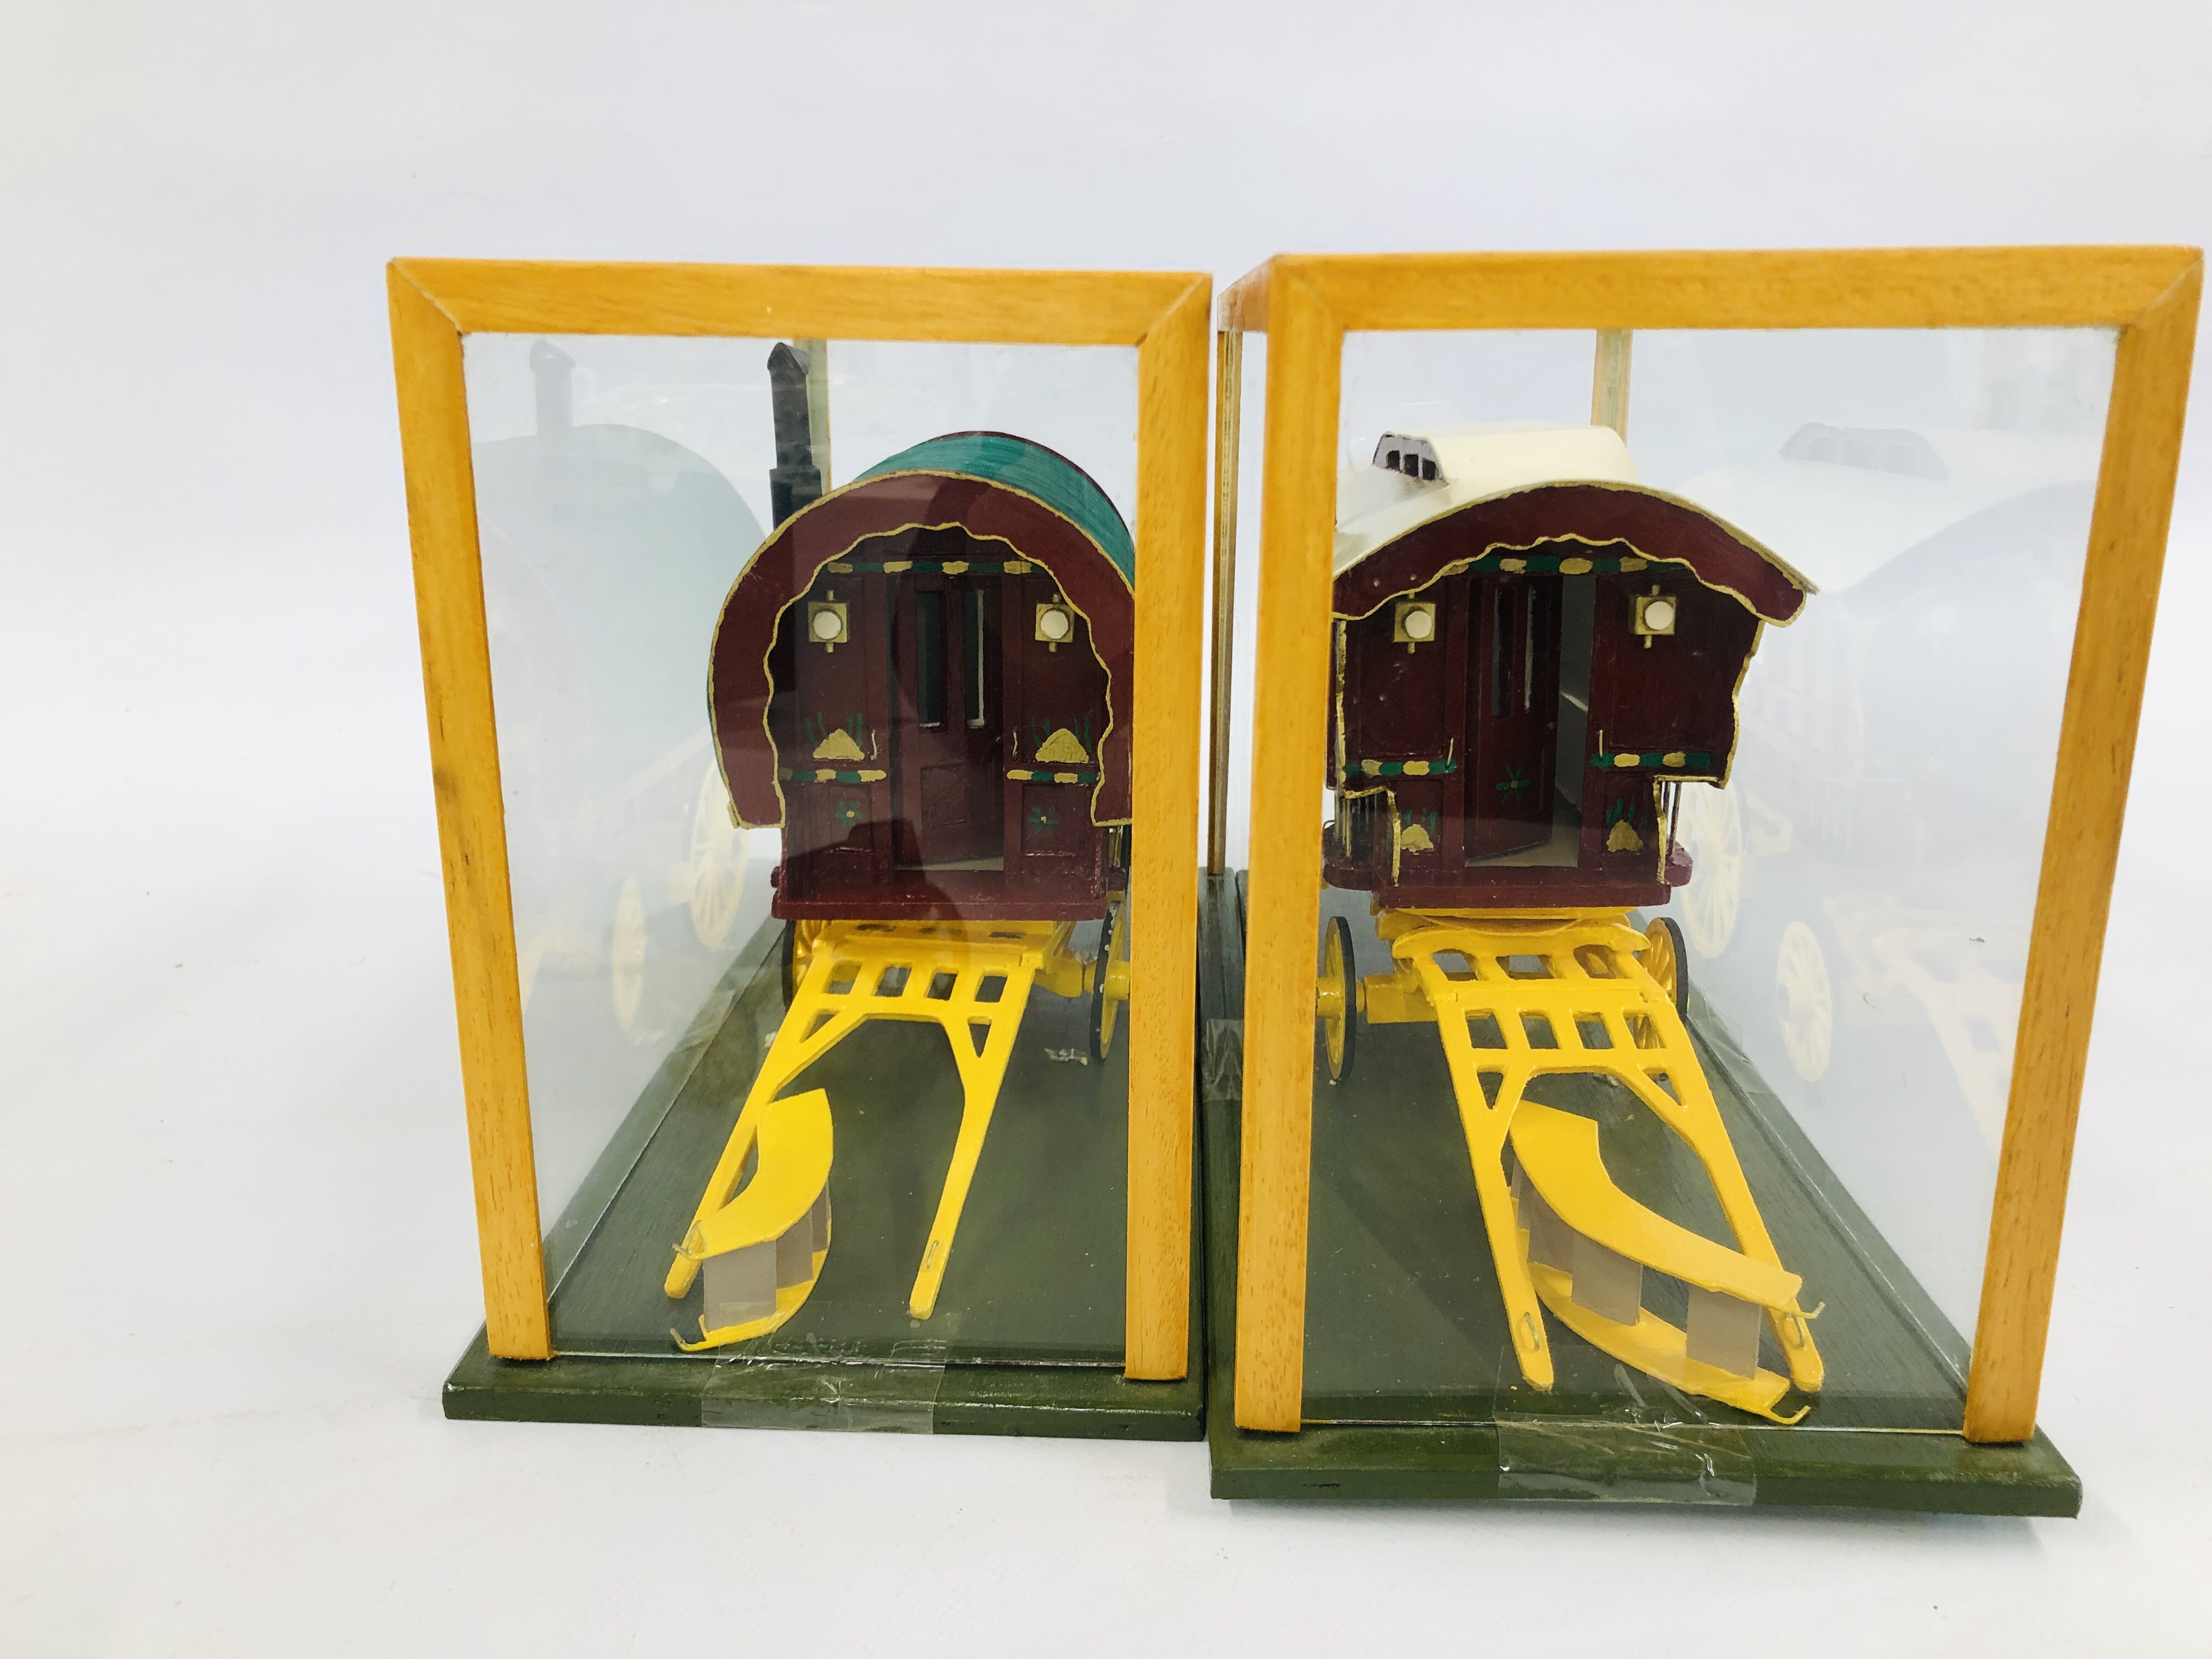 TWO WOODEN SCRATCH BUILT TRADITIONAL CARAVANS IN GLASS DISPLAY CASES ALONG WITH A FURTHER WOODEN - Image 6 of 6